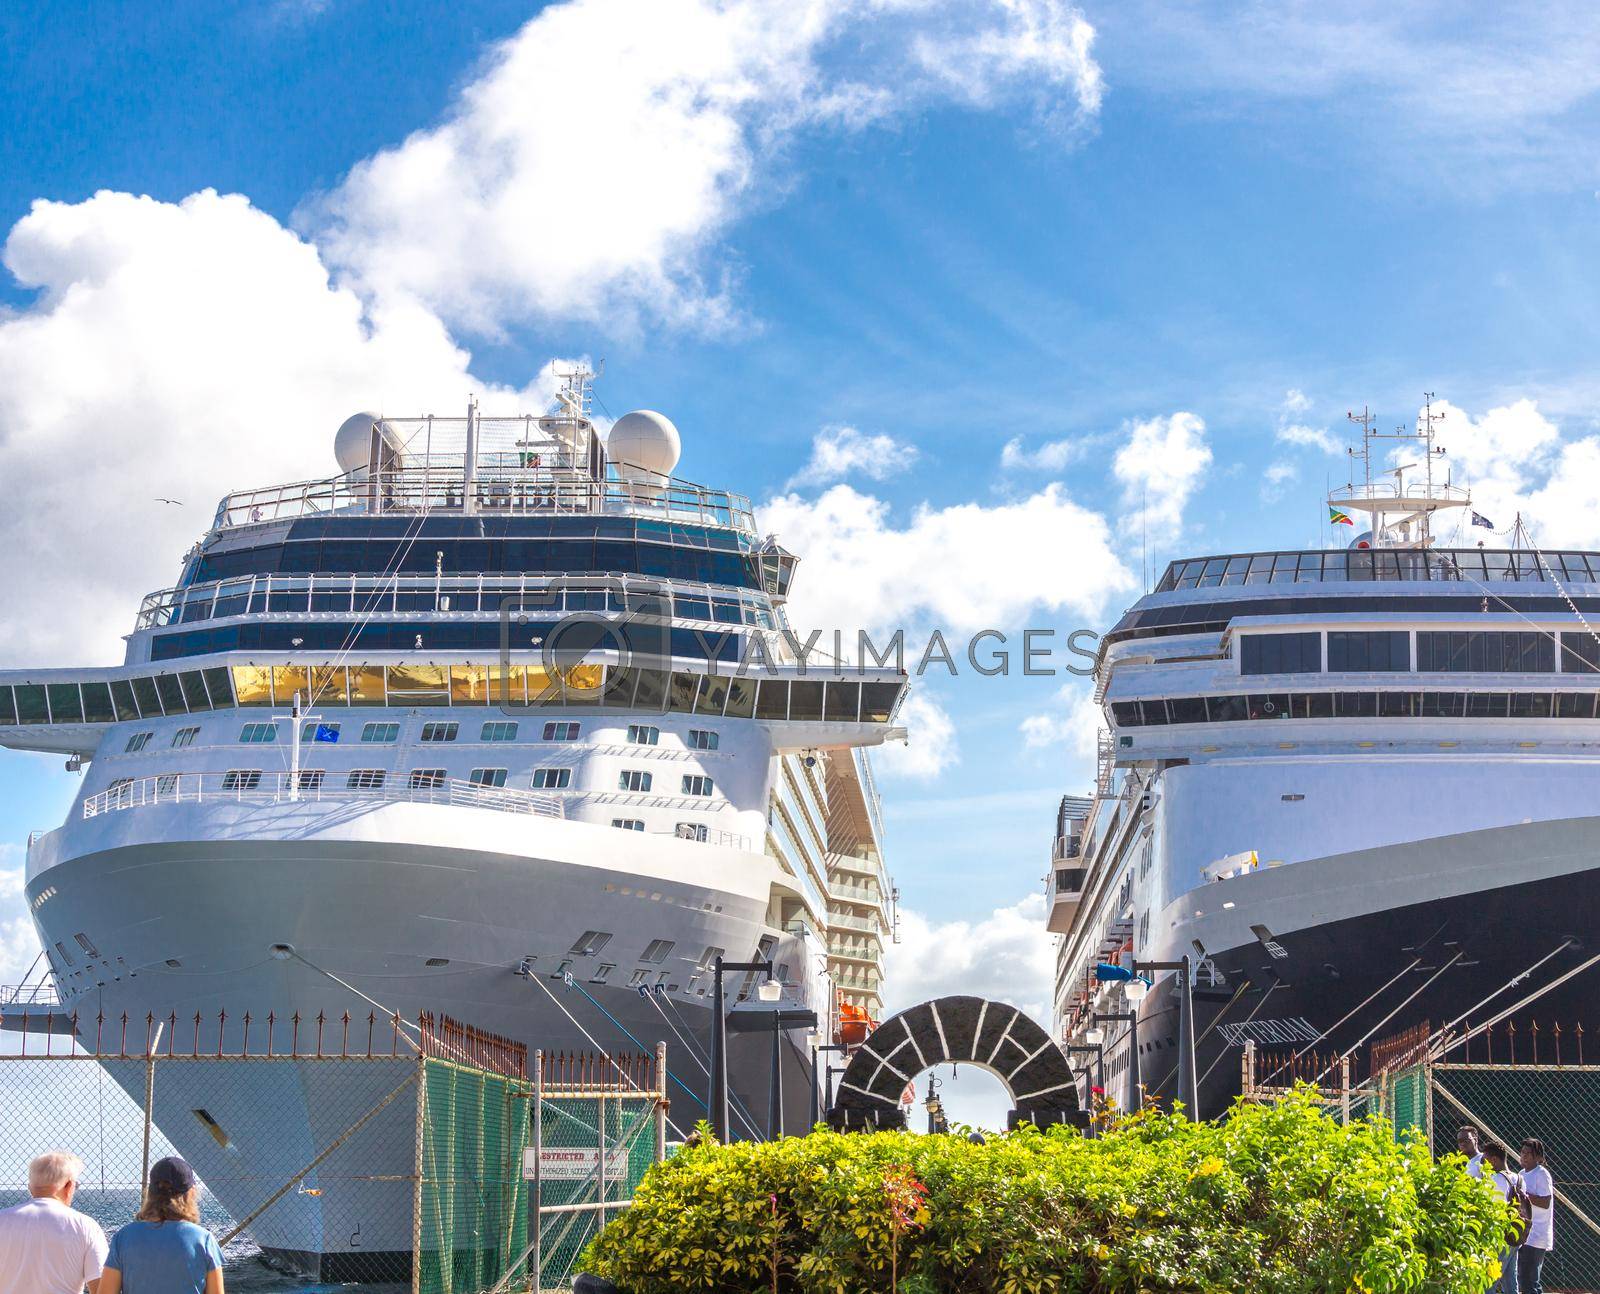 BASSETERRE, ST. KITS AND NEVIS 14 DECEMBER, 2016: Cruise passengers return to cruise ship at St Kitts Port Zante